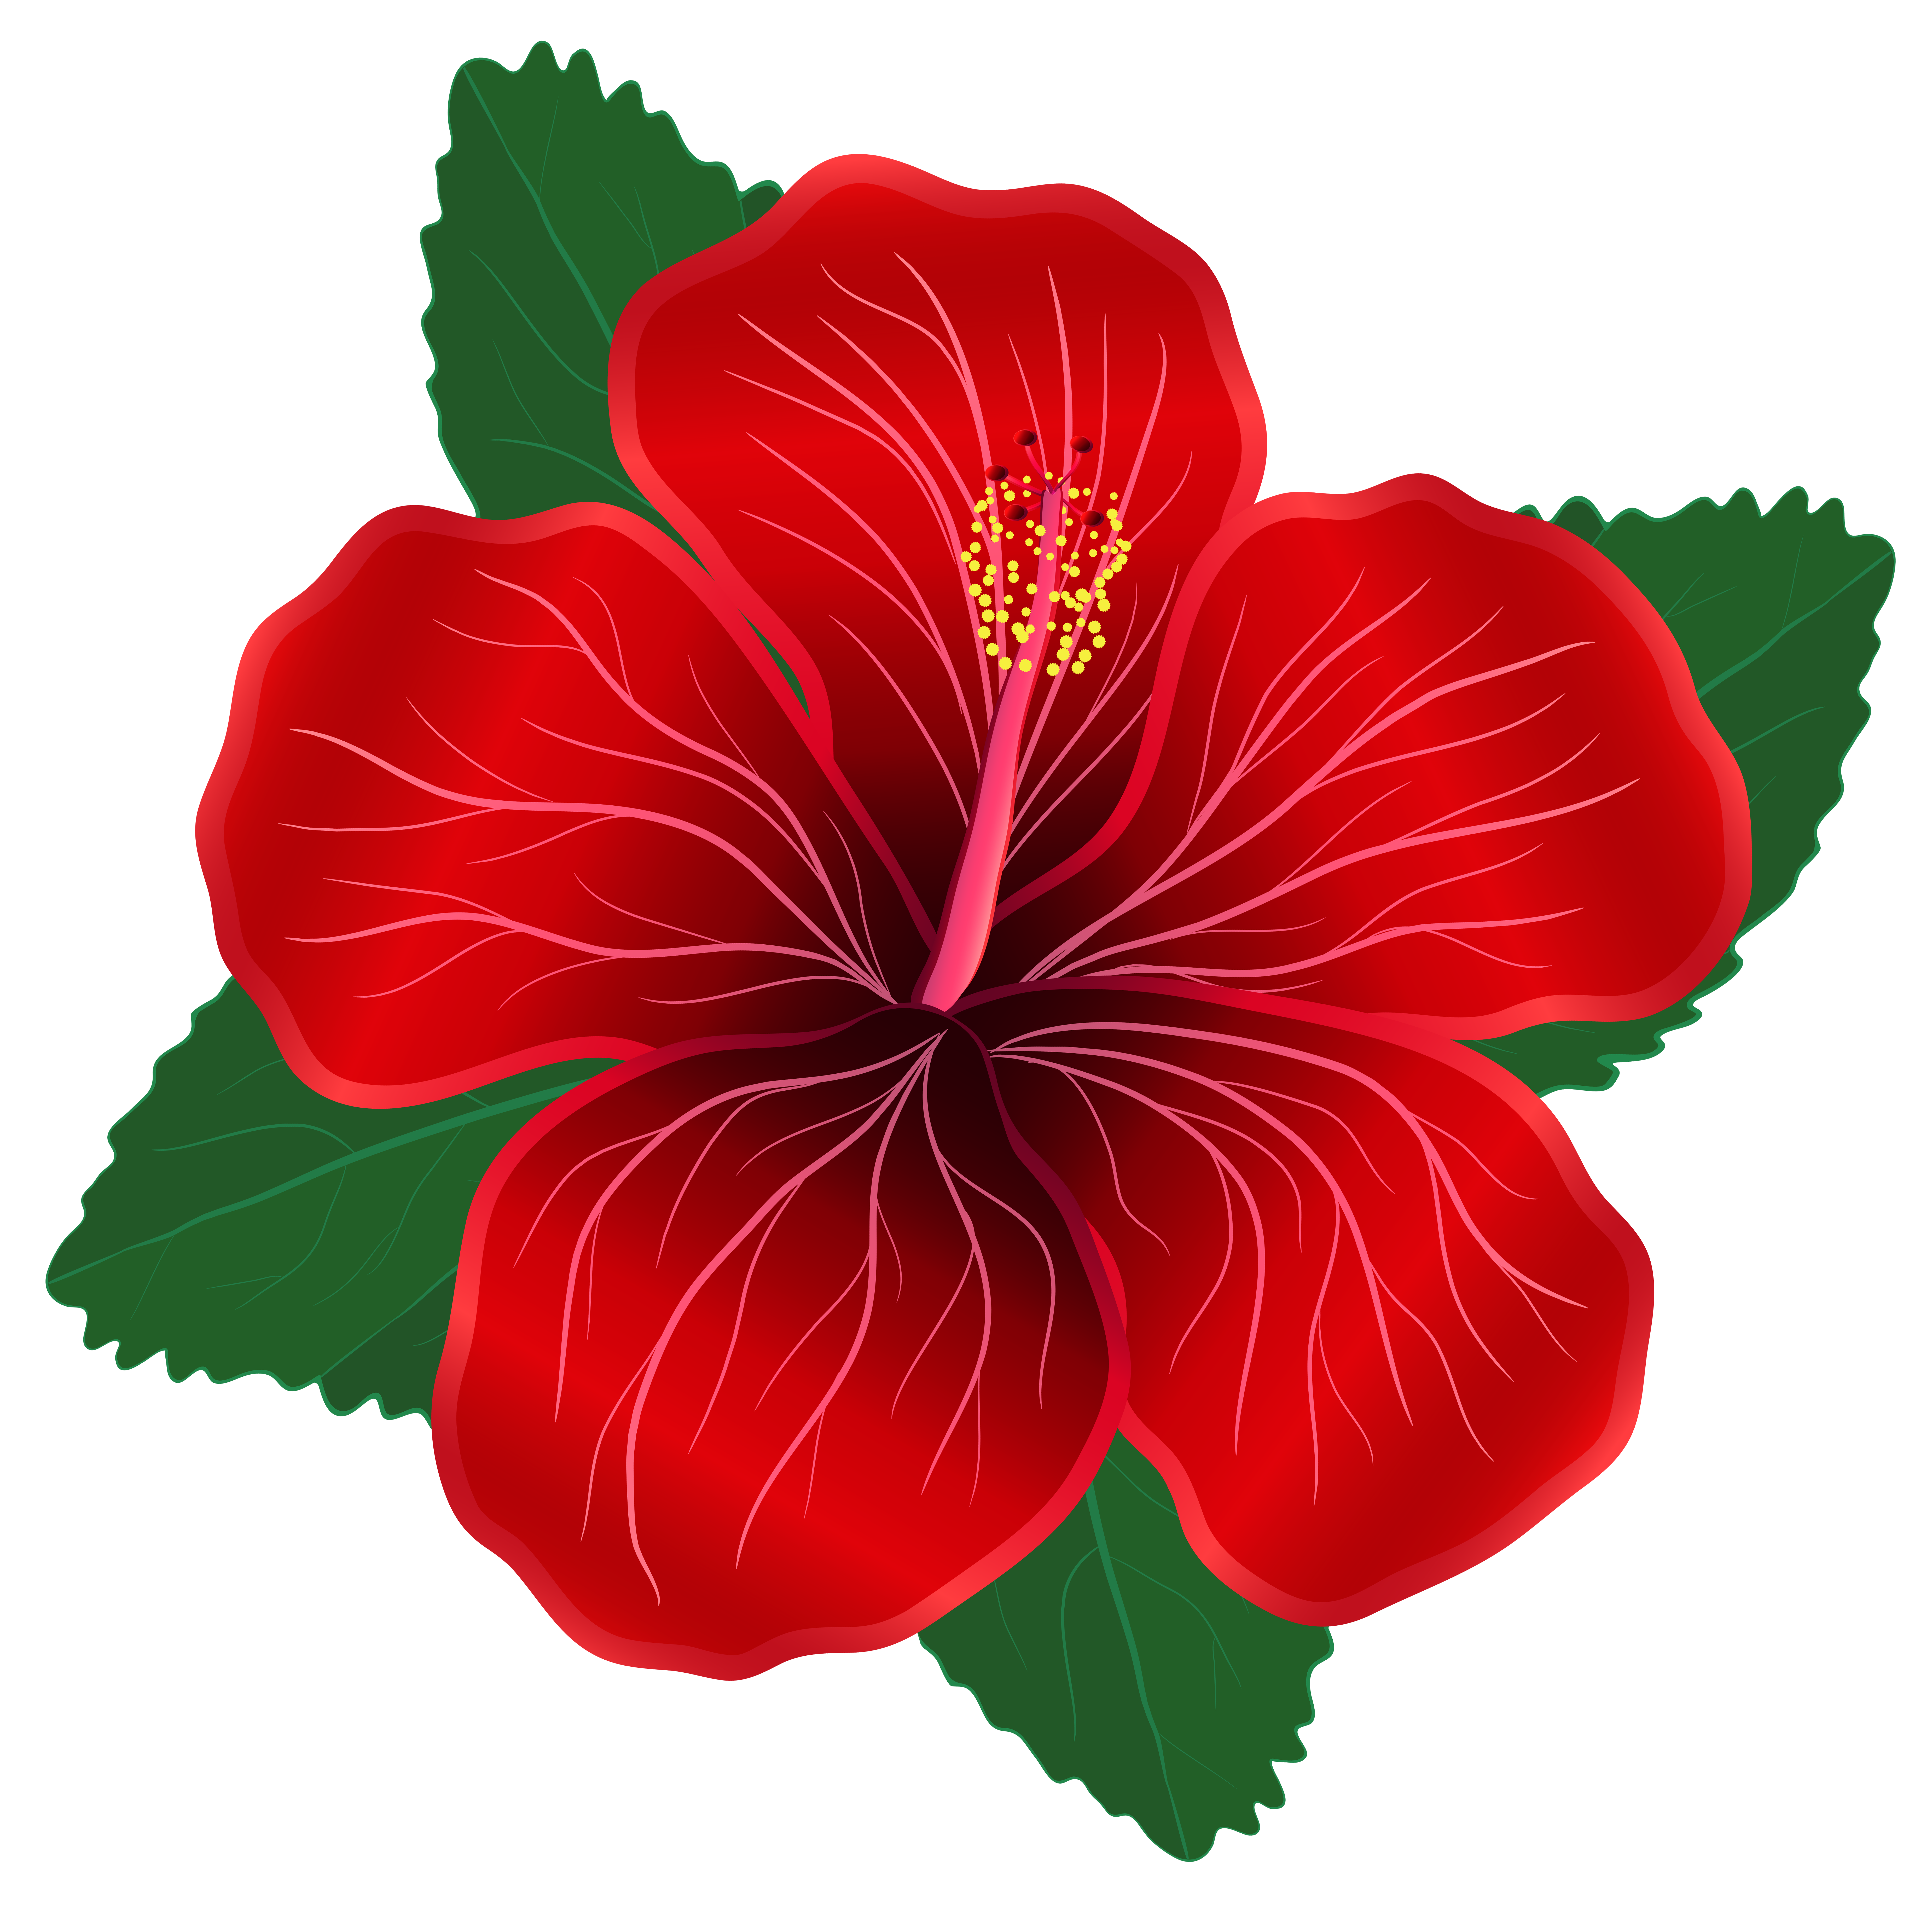 Red Flower PNG Clipart Image | Gallery Yopriceville - High-Quality